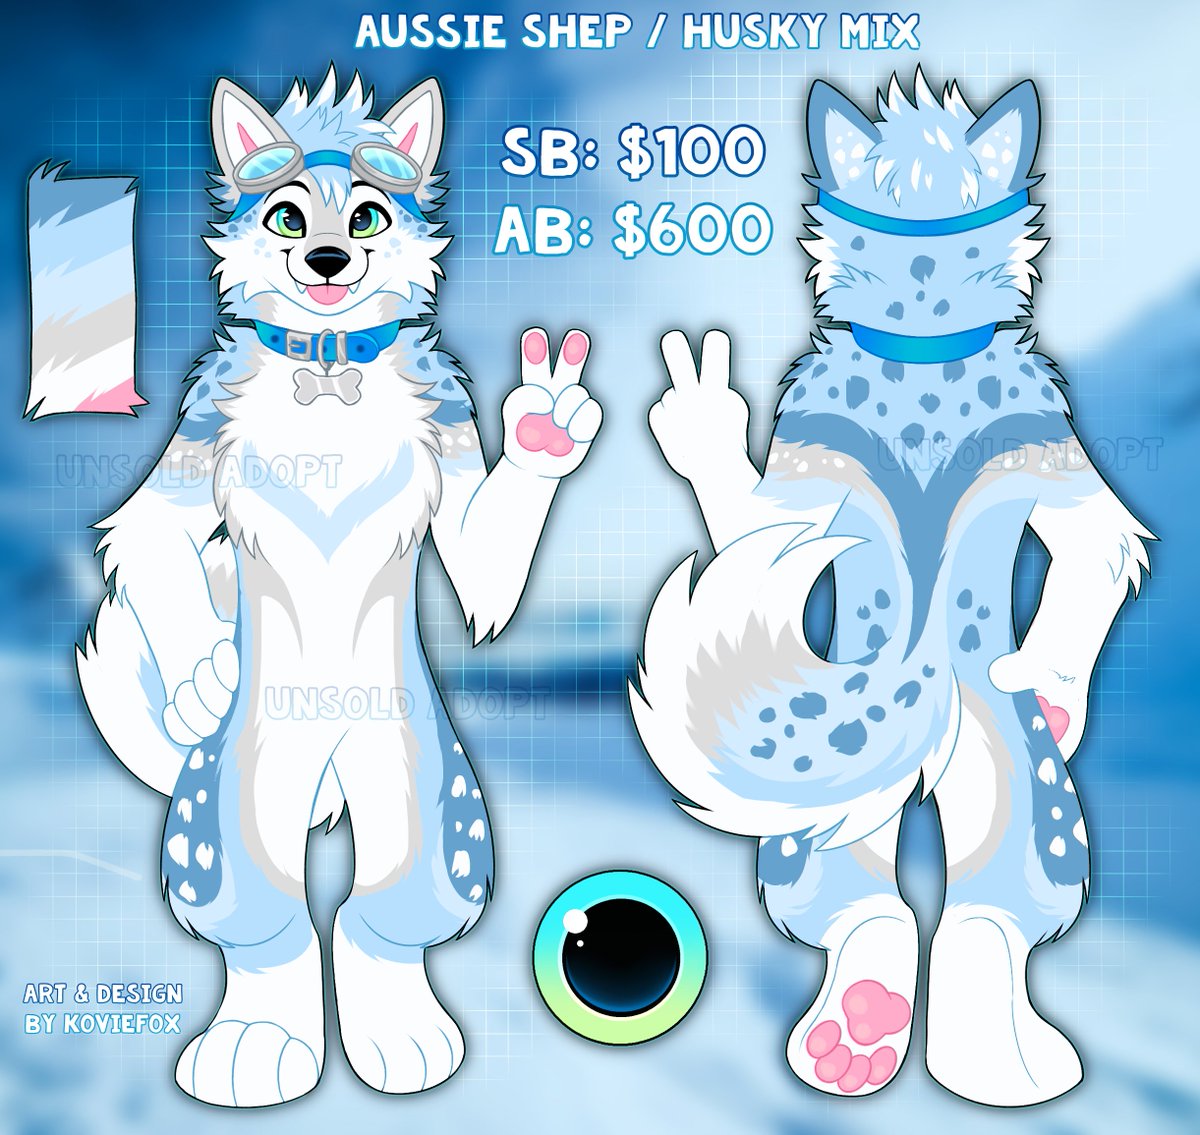 ❄️ Aussie Shep & Husky Mix ❄️ This little snow-loving pup is looking for a new home! • SB: 💲100 • AB: 💲 600 • Reply to the bid chain below or DM me to offer privately! • Shares are highly appreciated 💙